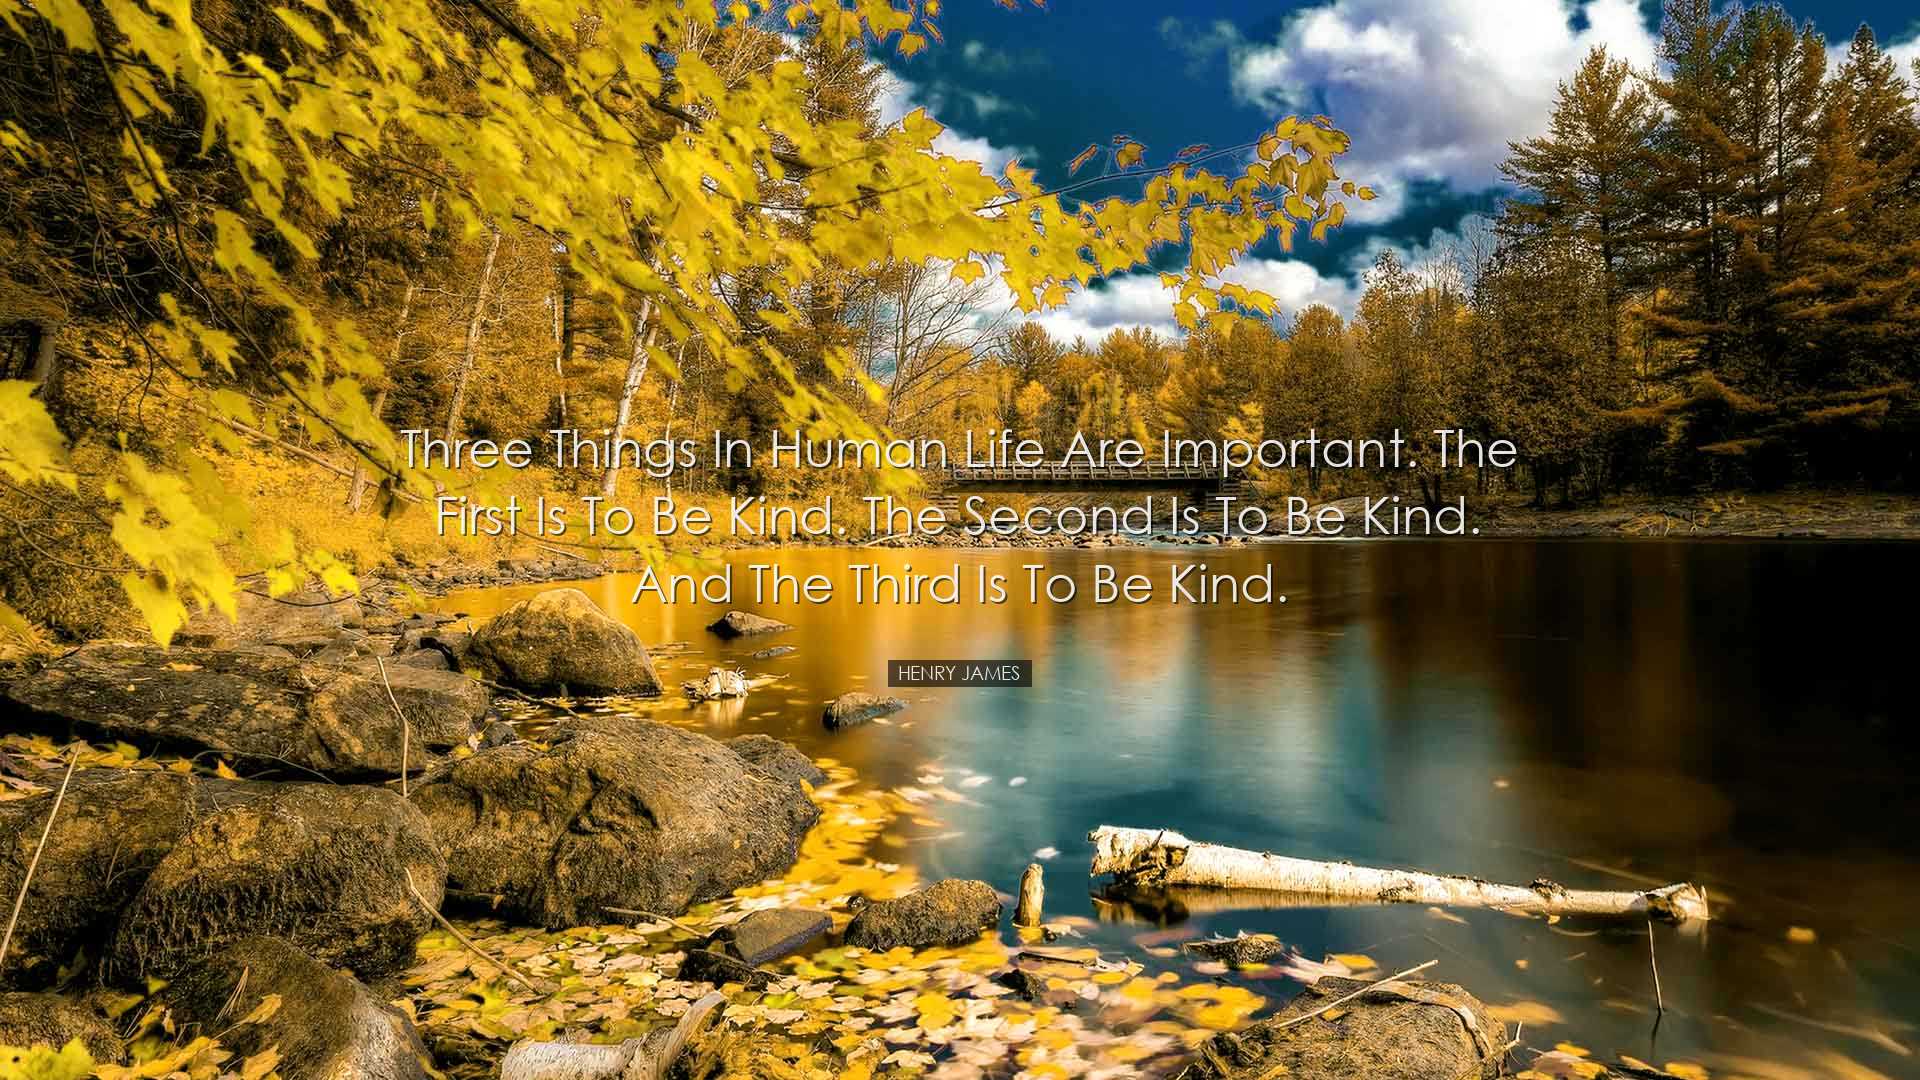 Three things in human life are important. The first is to be kind.